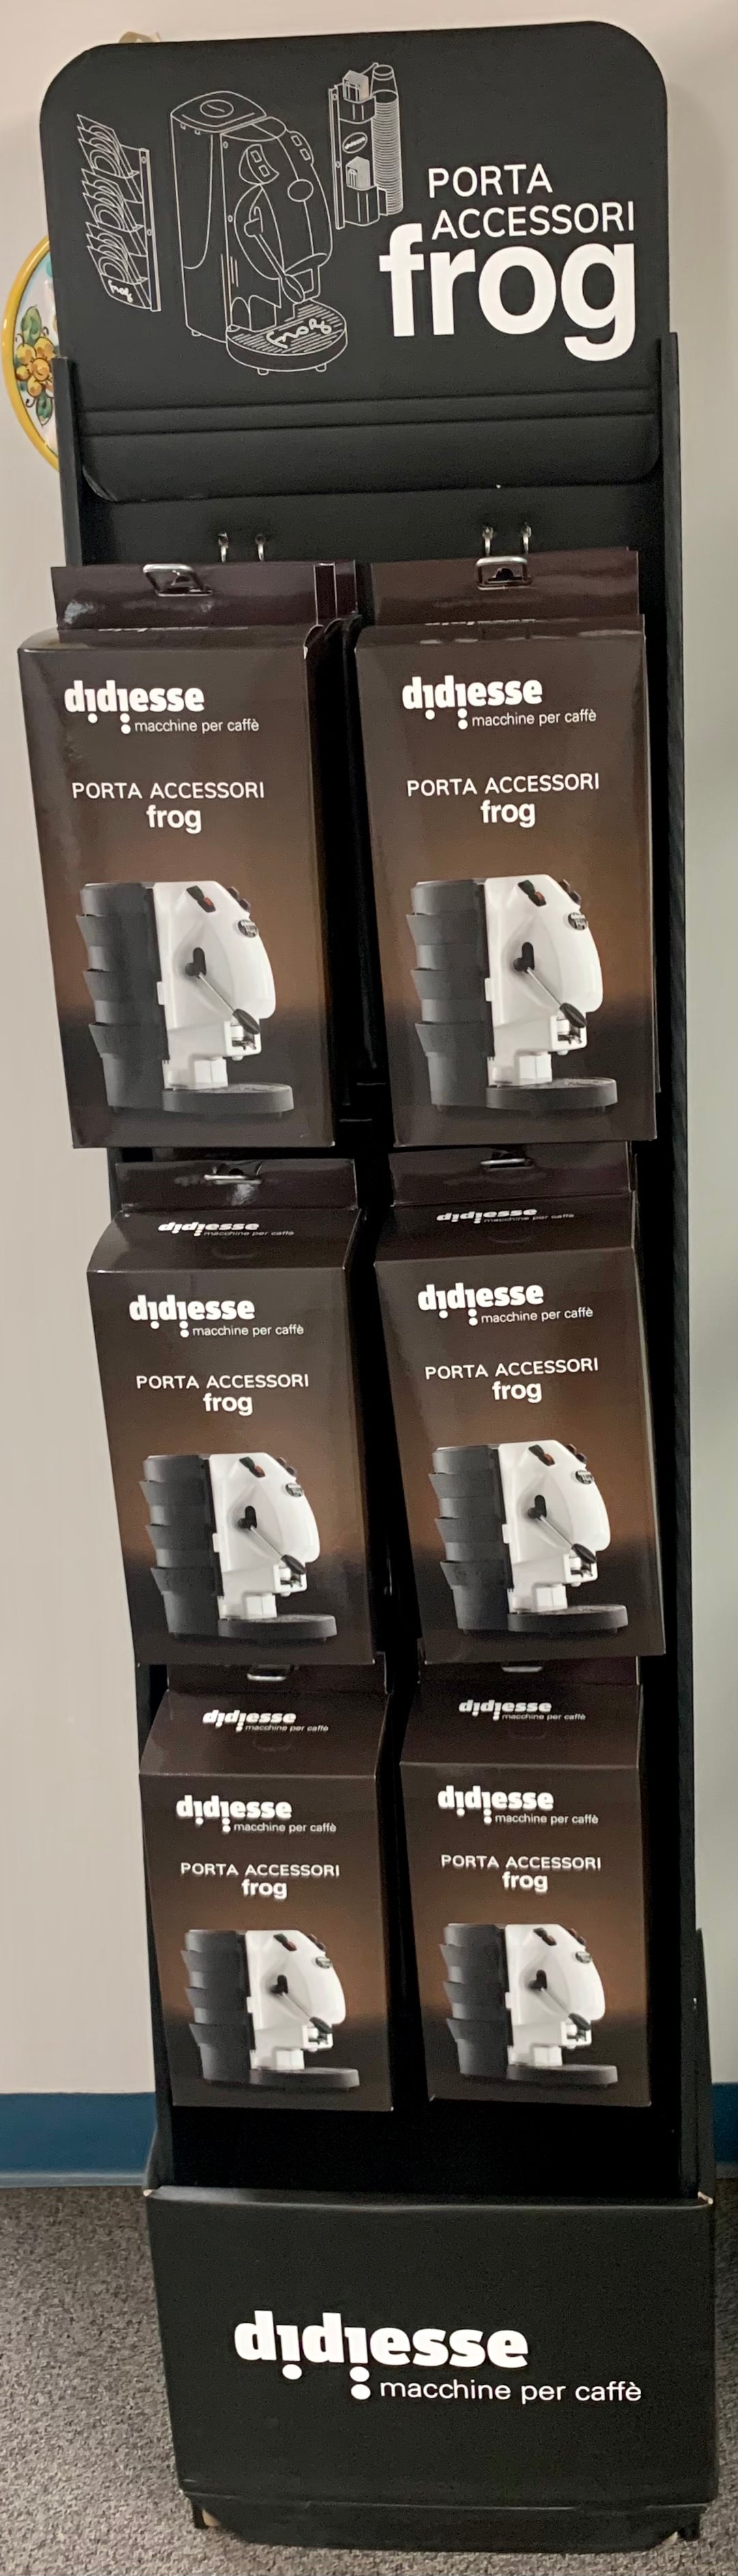 DIDIESSE FROG Accessory Kit for Coffee Machine Frog, Black, Unique